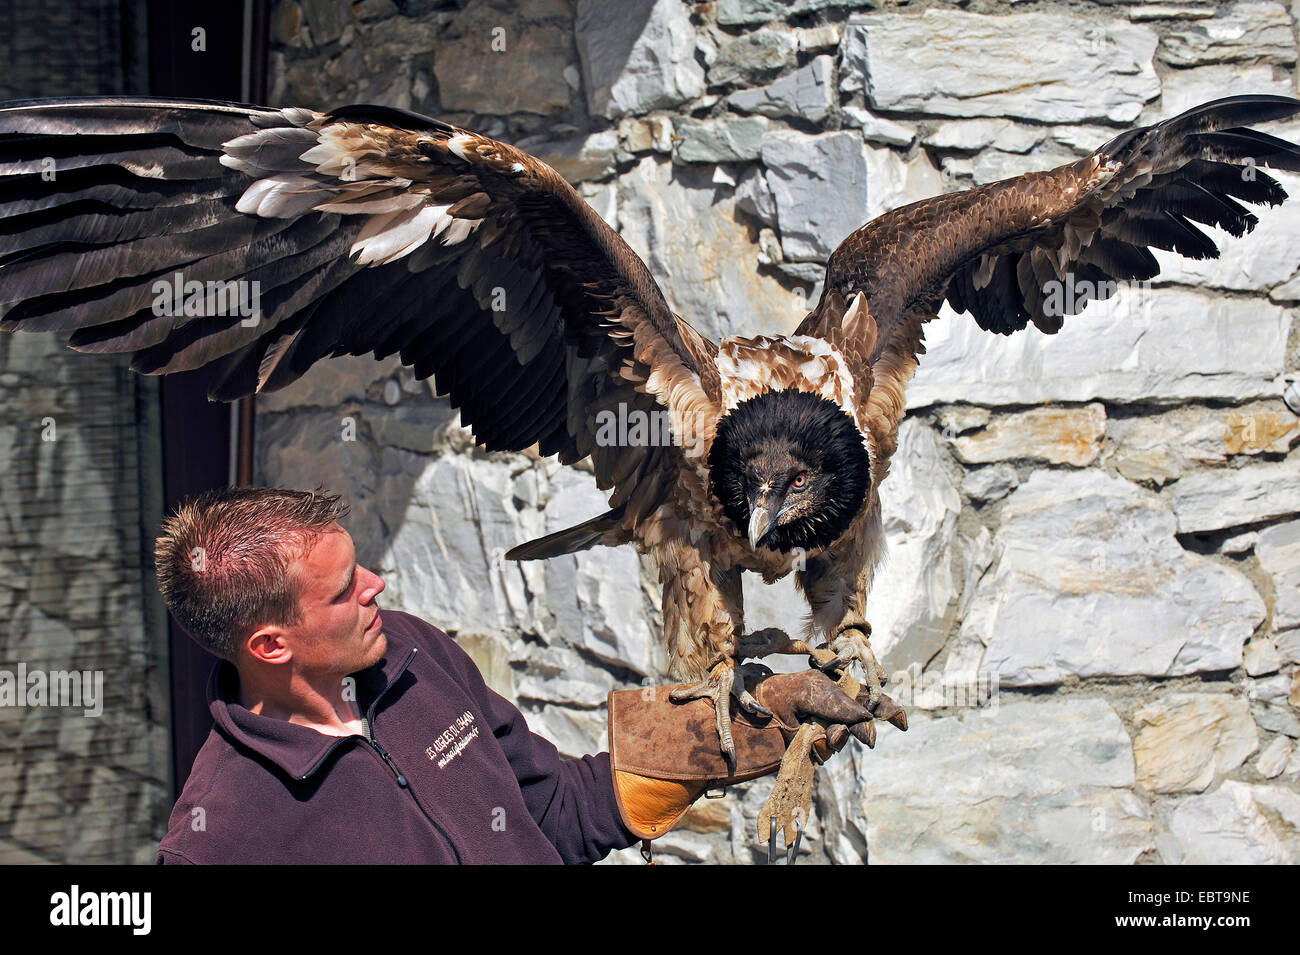 Lammergeier; Lammergeyer; Bearded Vulture (Gypaetus barbatus), falconer with a one year old bird on the arm, France Stock Photo